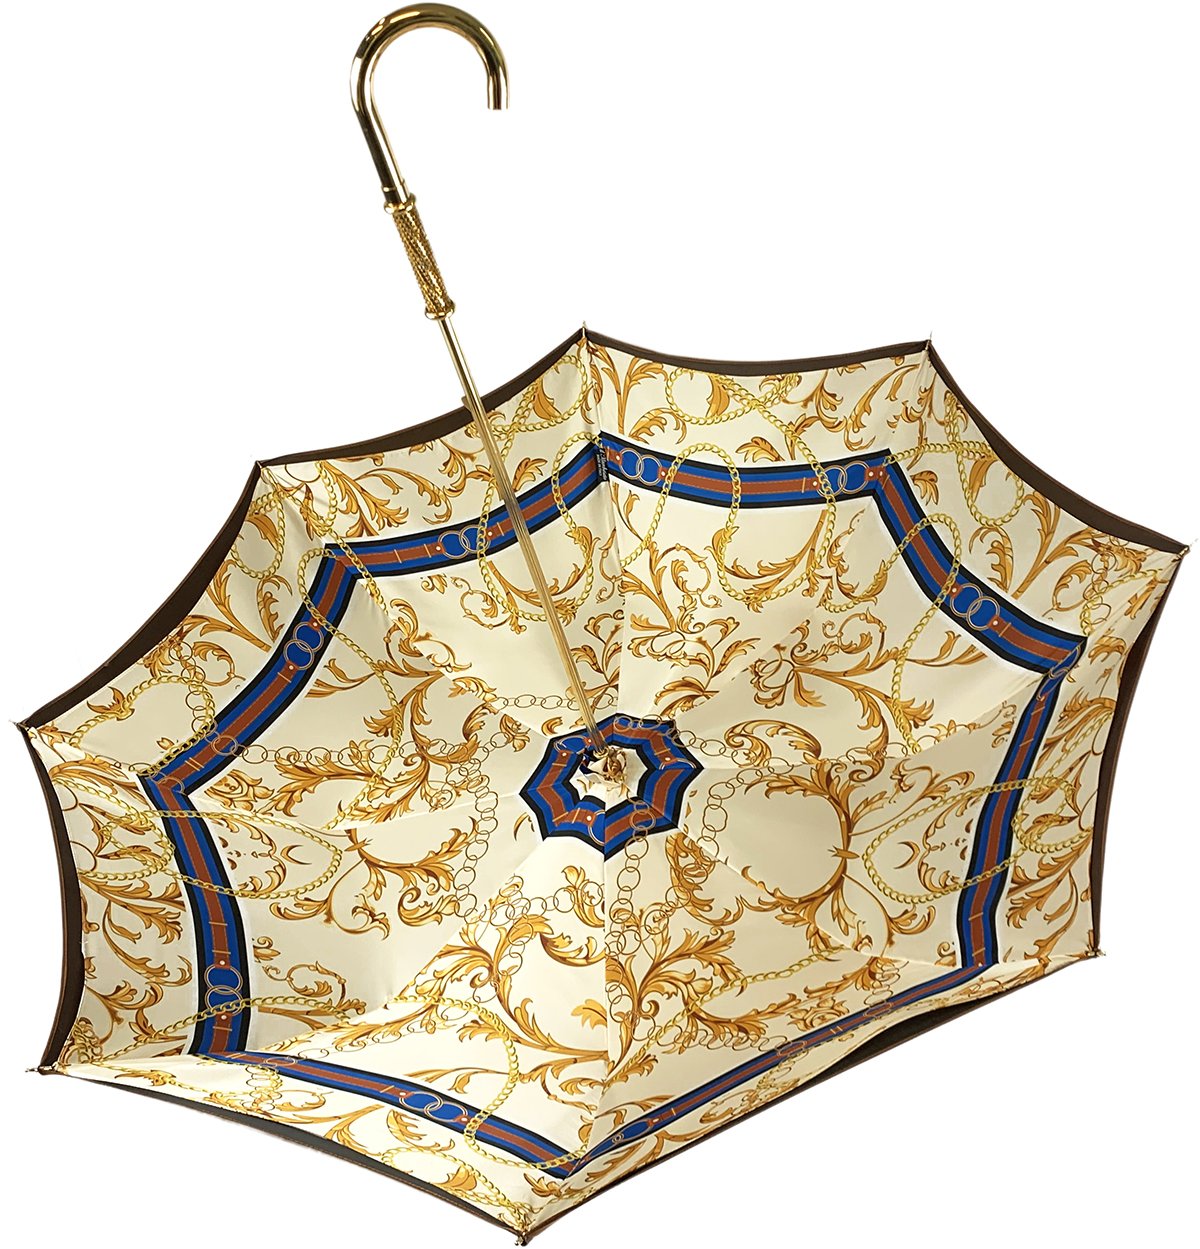 Superb Bronze Color Umbrella With Chains Pattern - IL MARCHESATO LUXURY UMBRELLAS, CANES AND SHOEHORNS